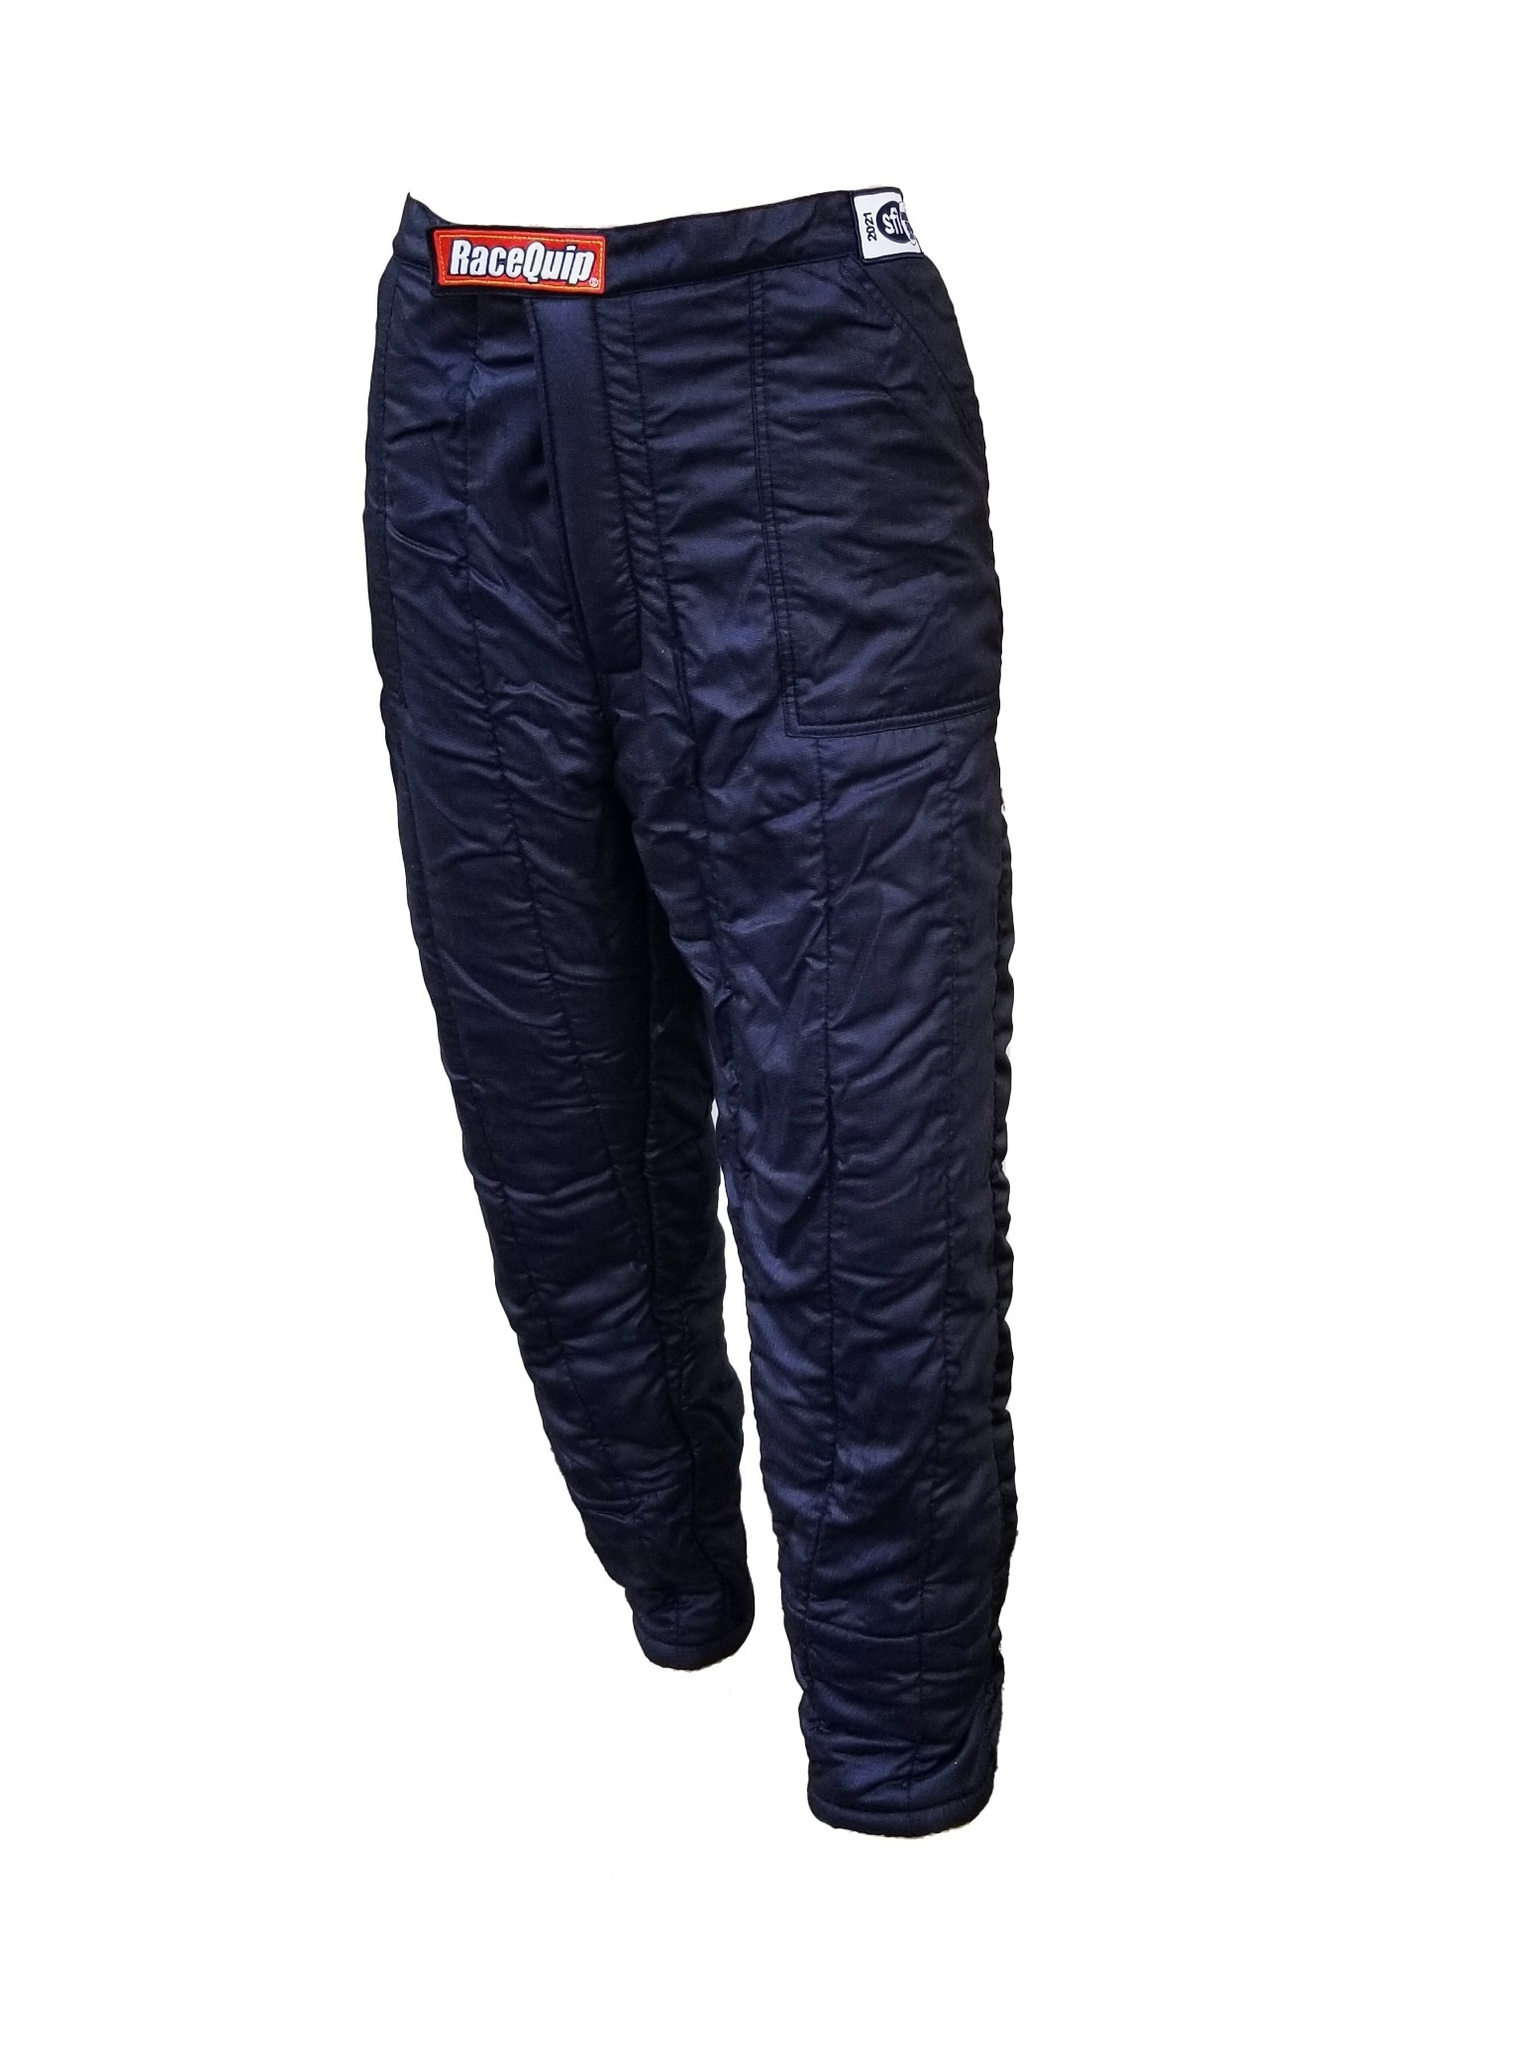 Racequip 91929969 Driving Pants, SFI 3.2A/15, Multiple Layer, Aramid Fabric / Nomex, Black, X-Large, Each